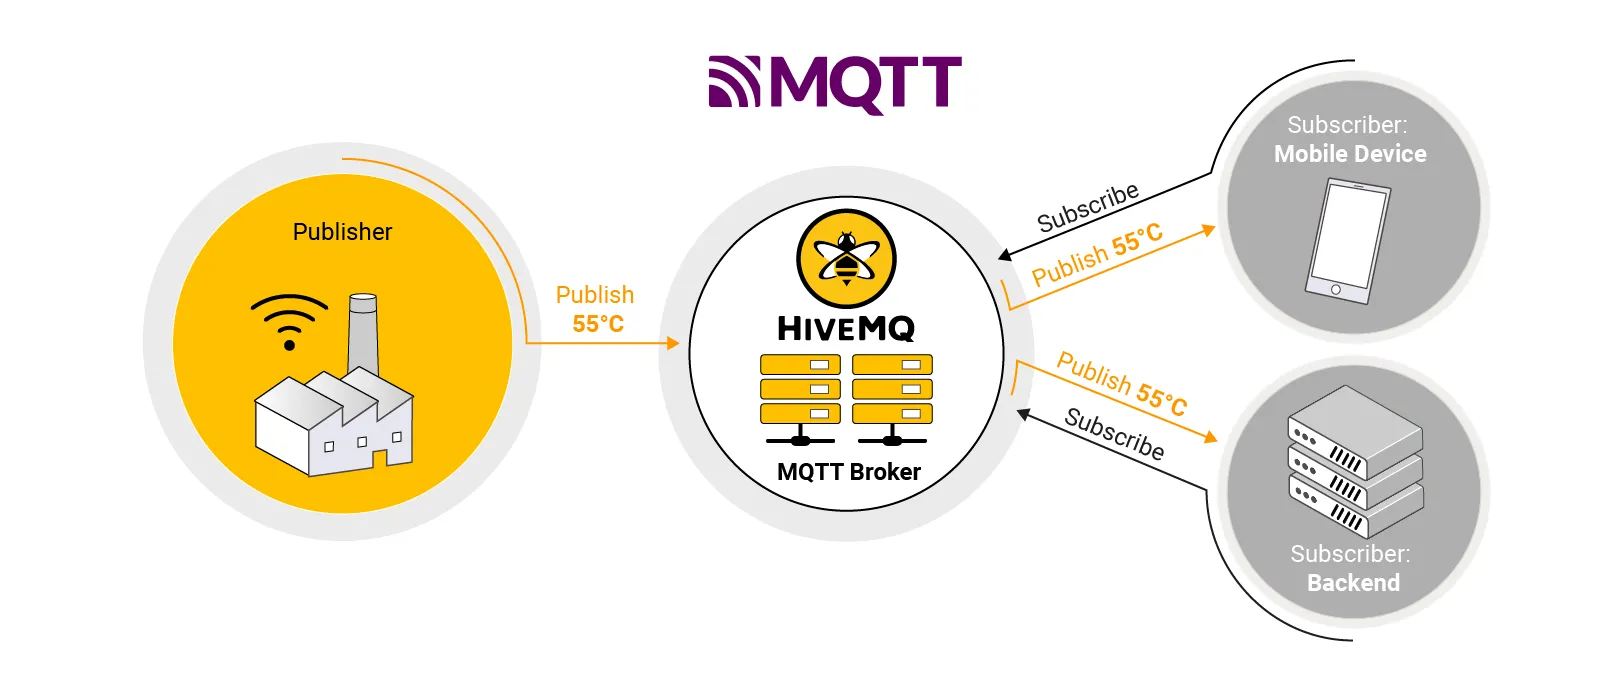 How an MQTT-based messaging system works